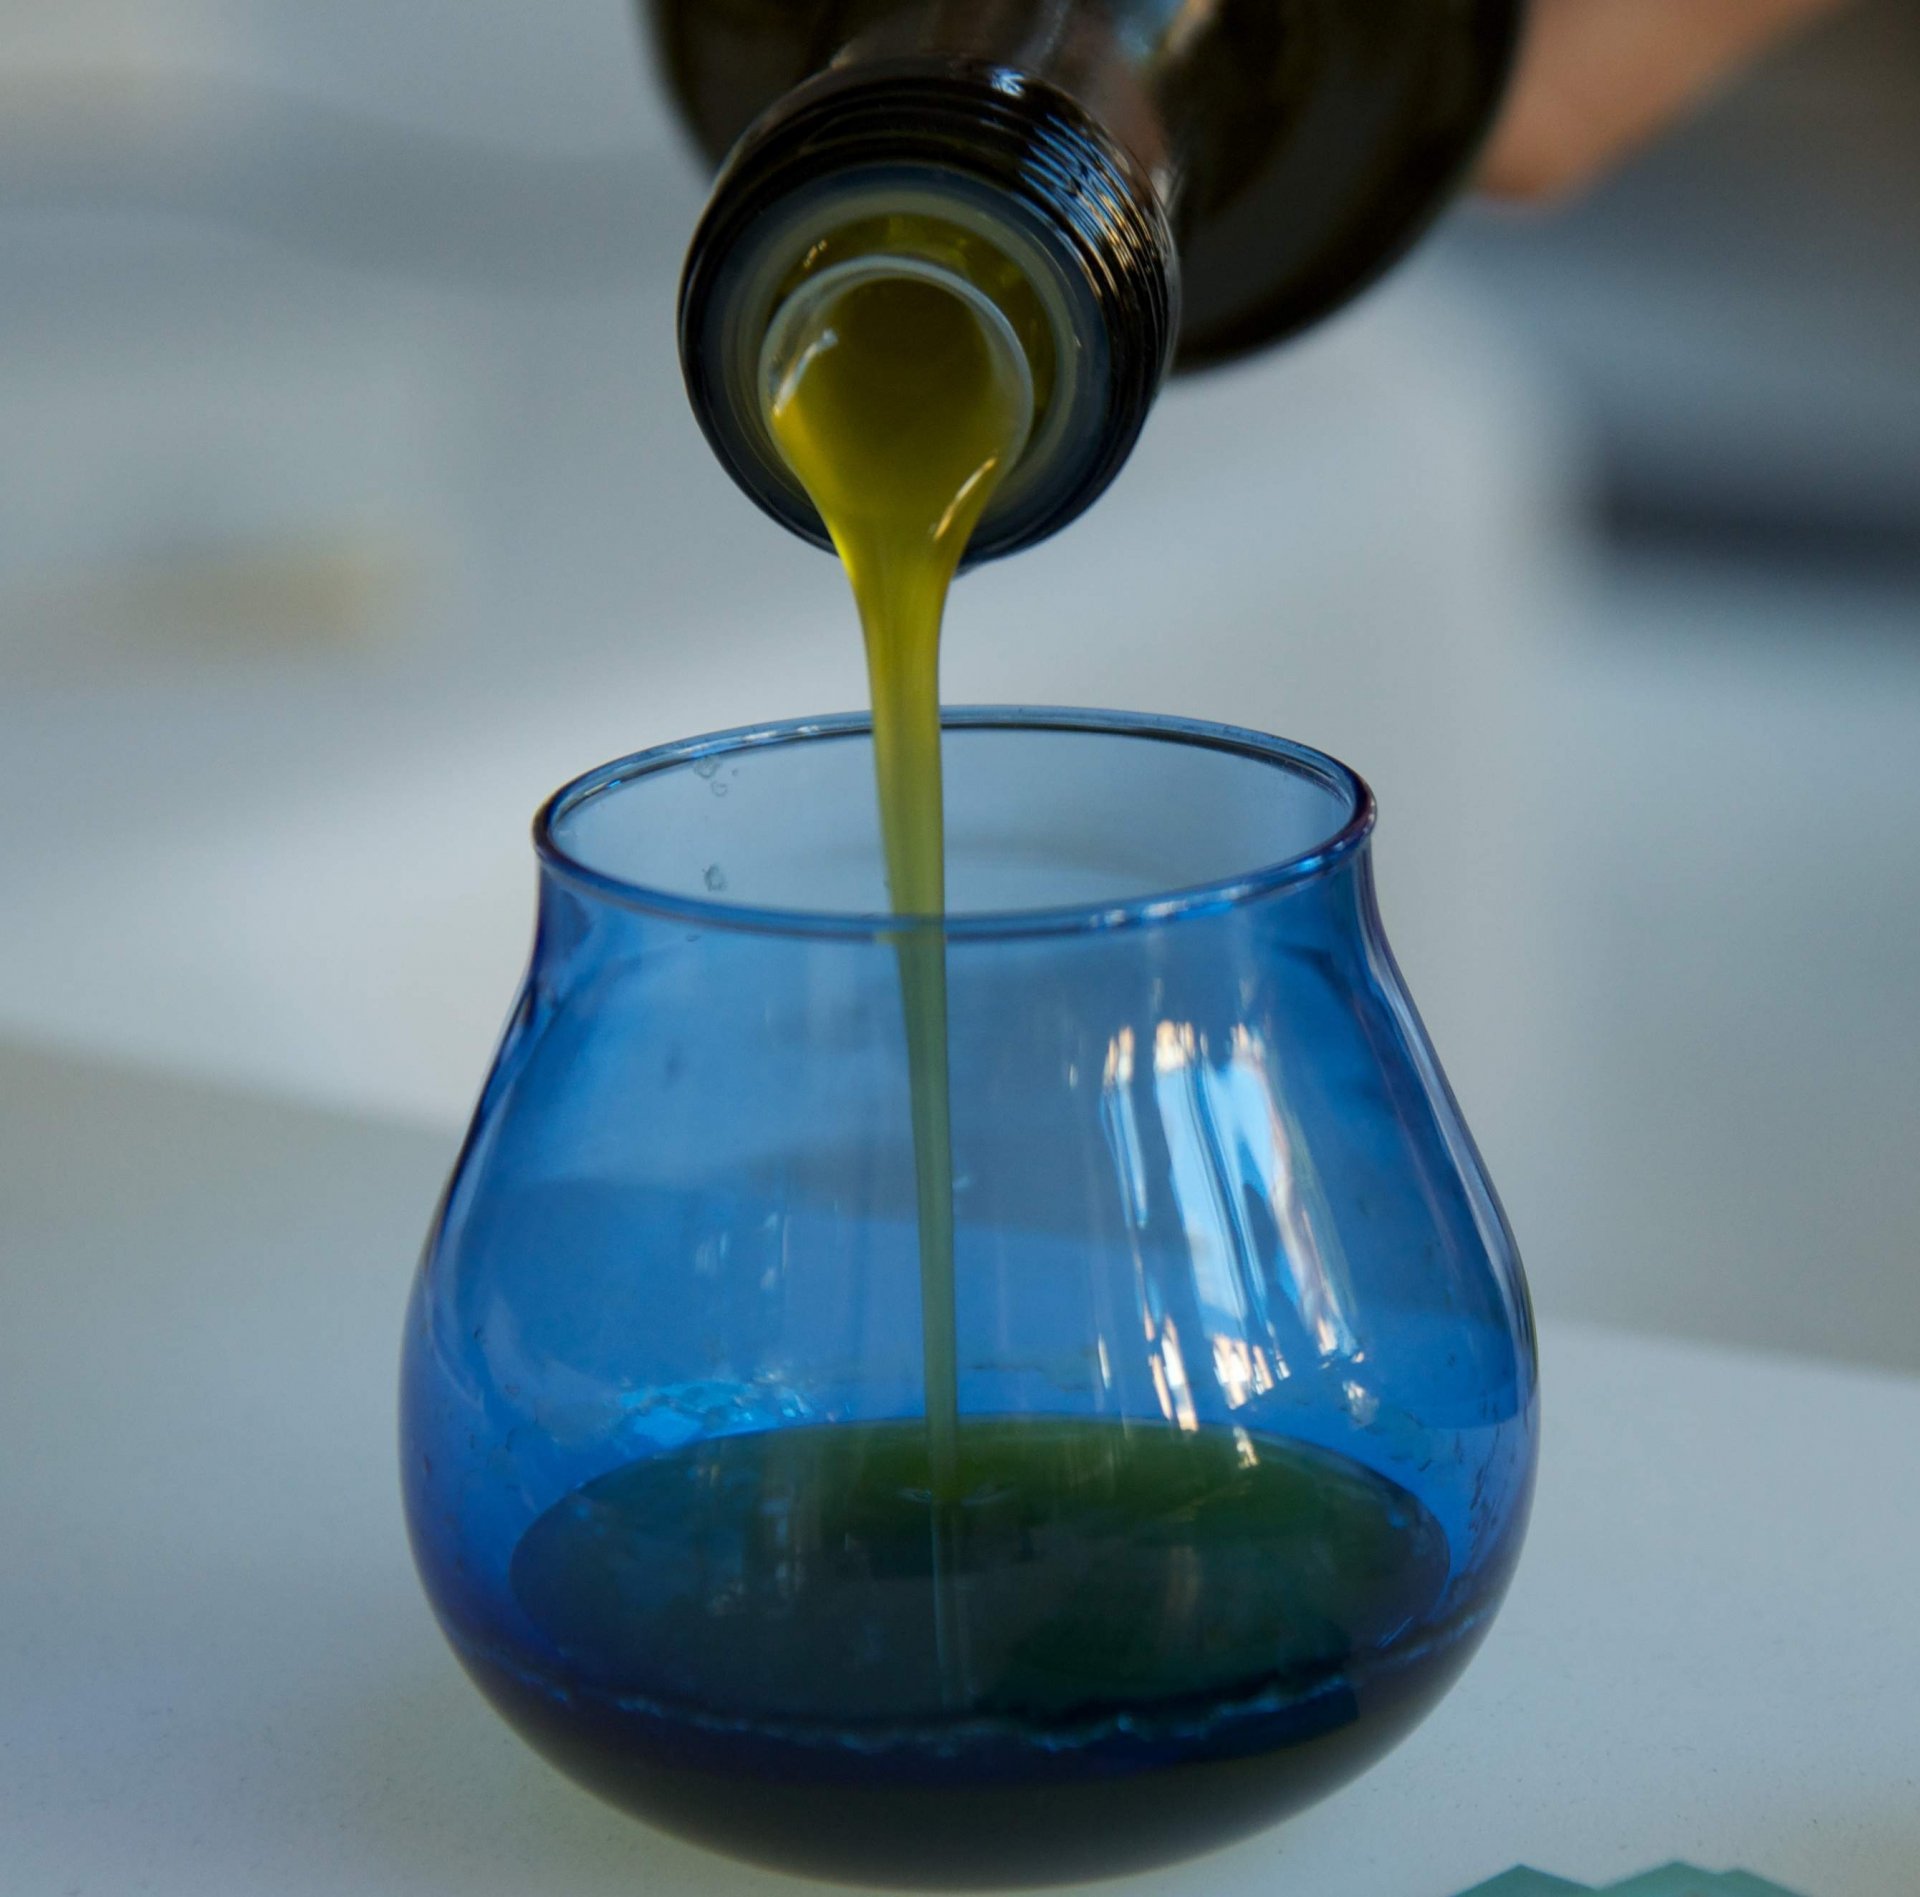 A conclusive argument for the success of excellent olive oils in restaurants will be...